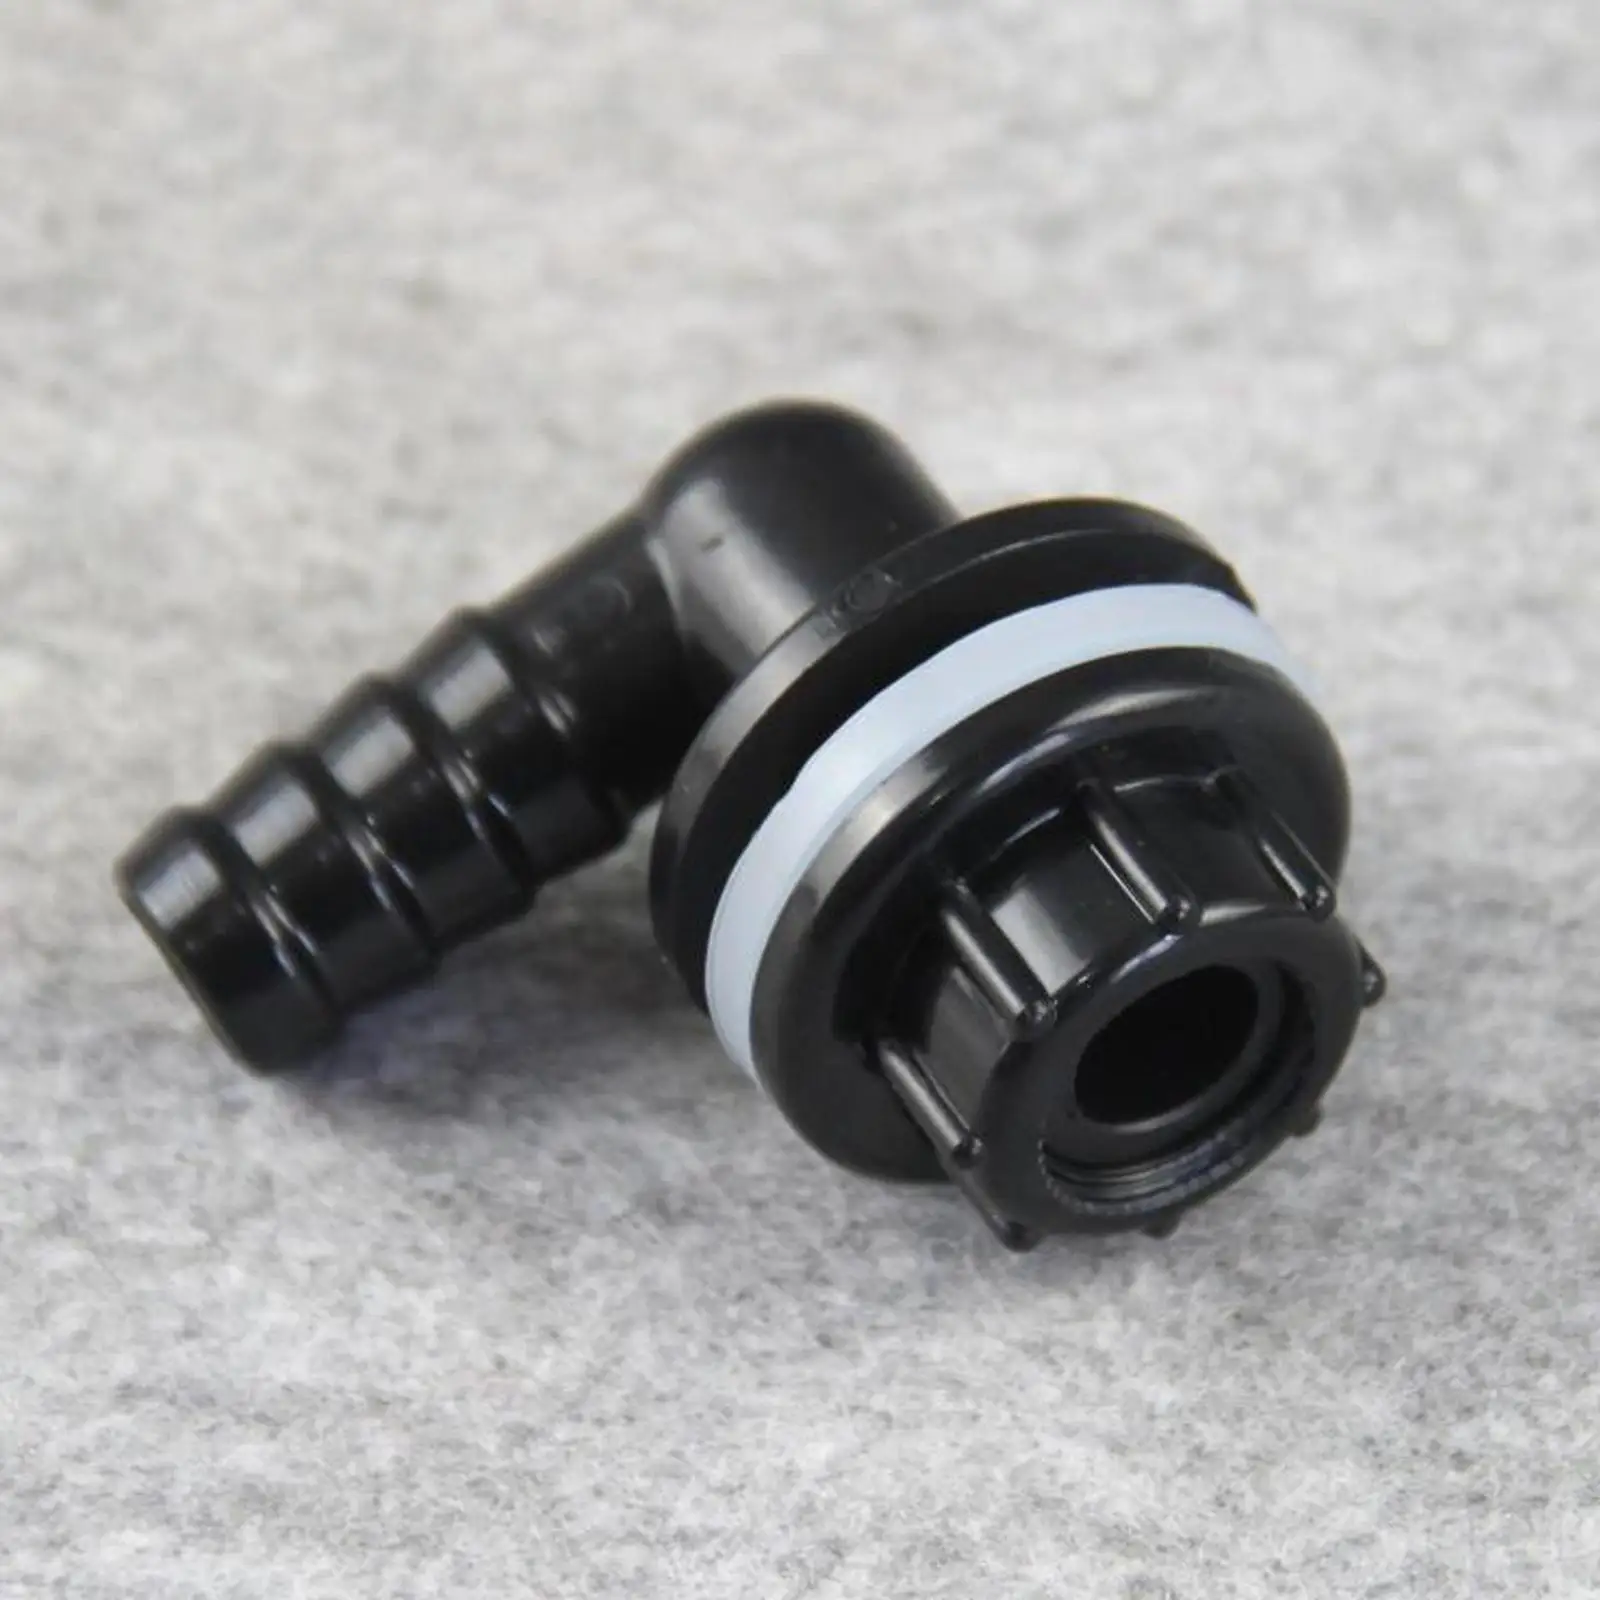 Water Tank Drain Connector Water Hose Replace Fitting Water Tank Drainage System Aquarium Drainage Connector High Efficient Part